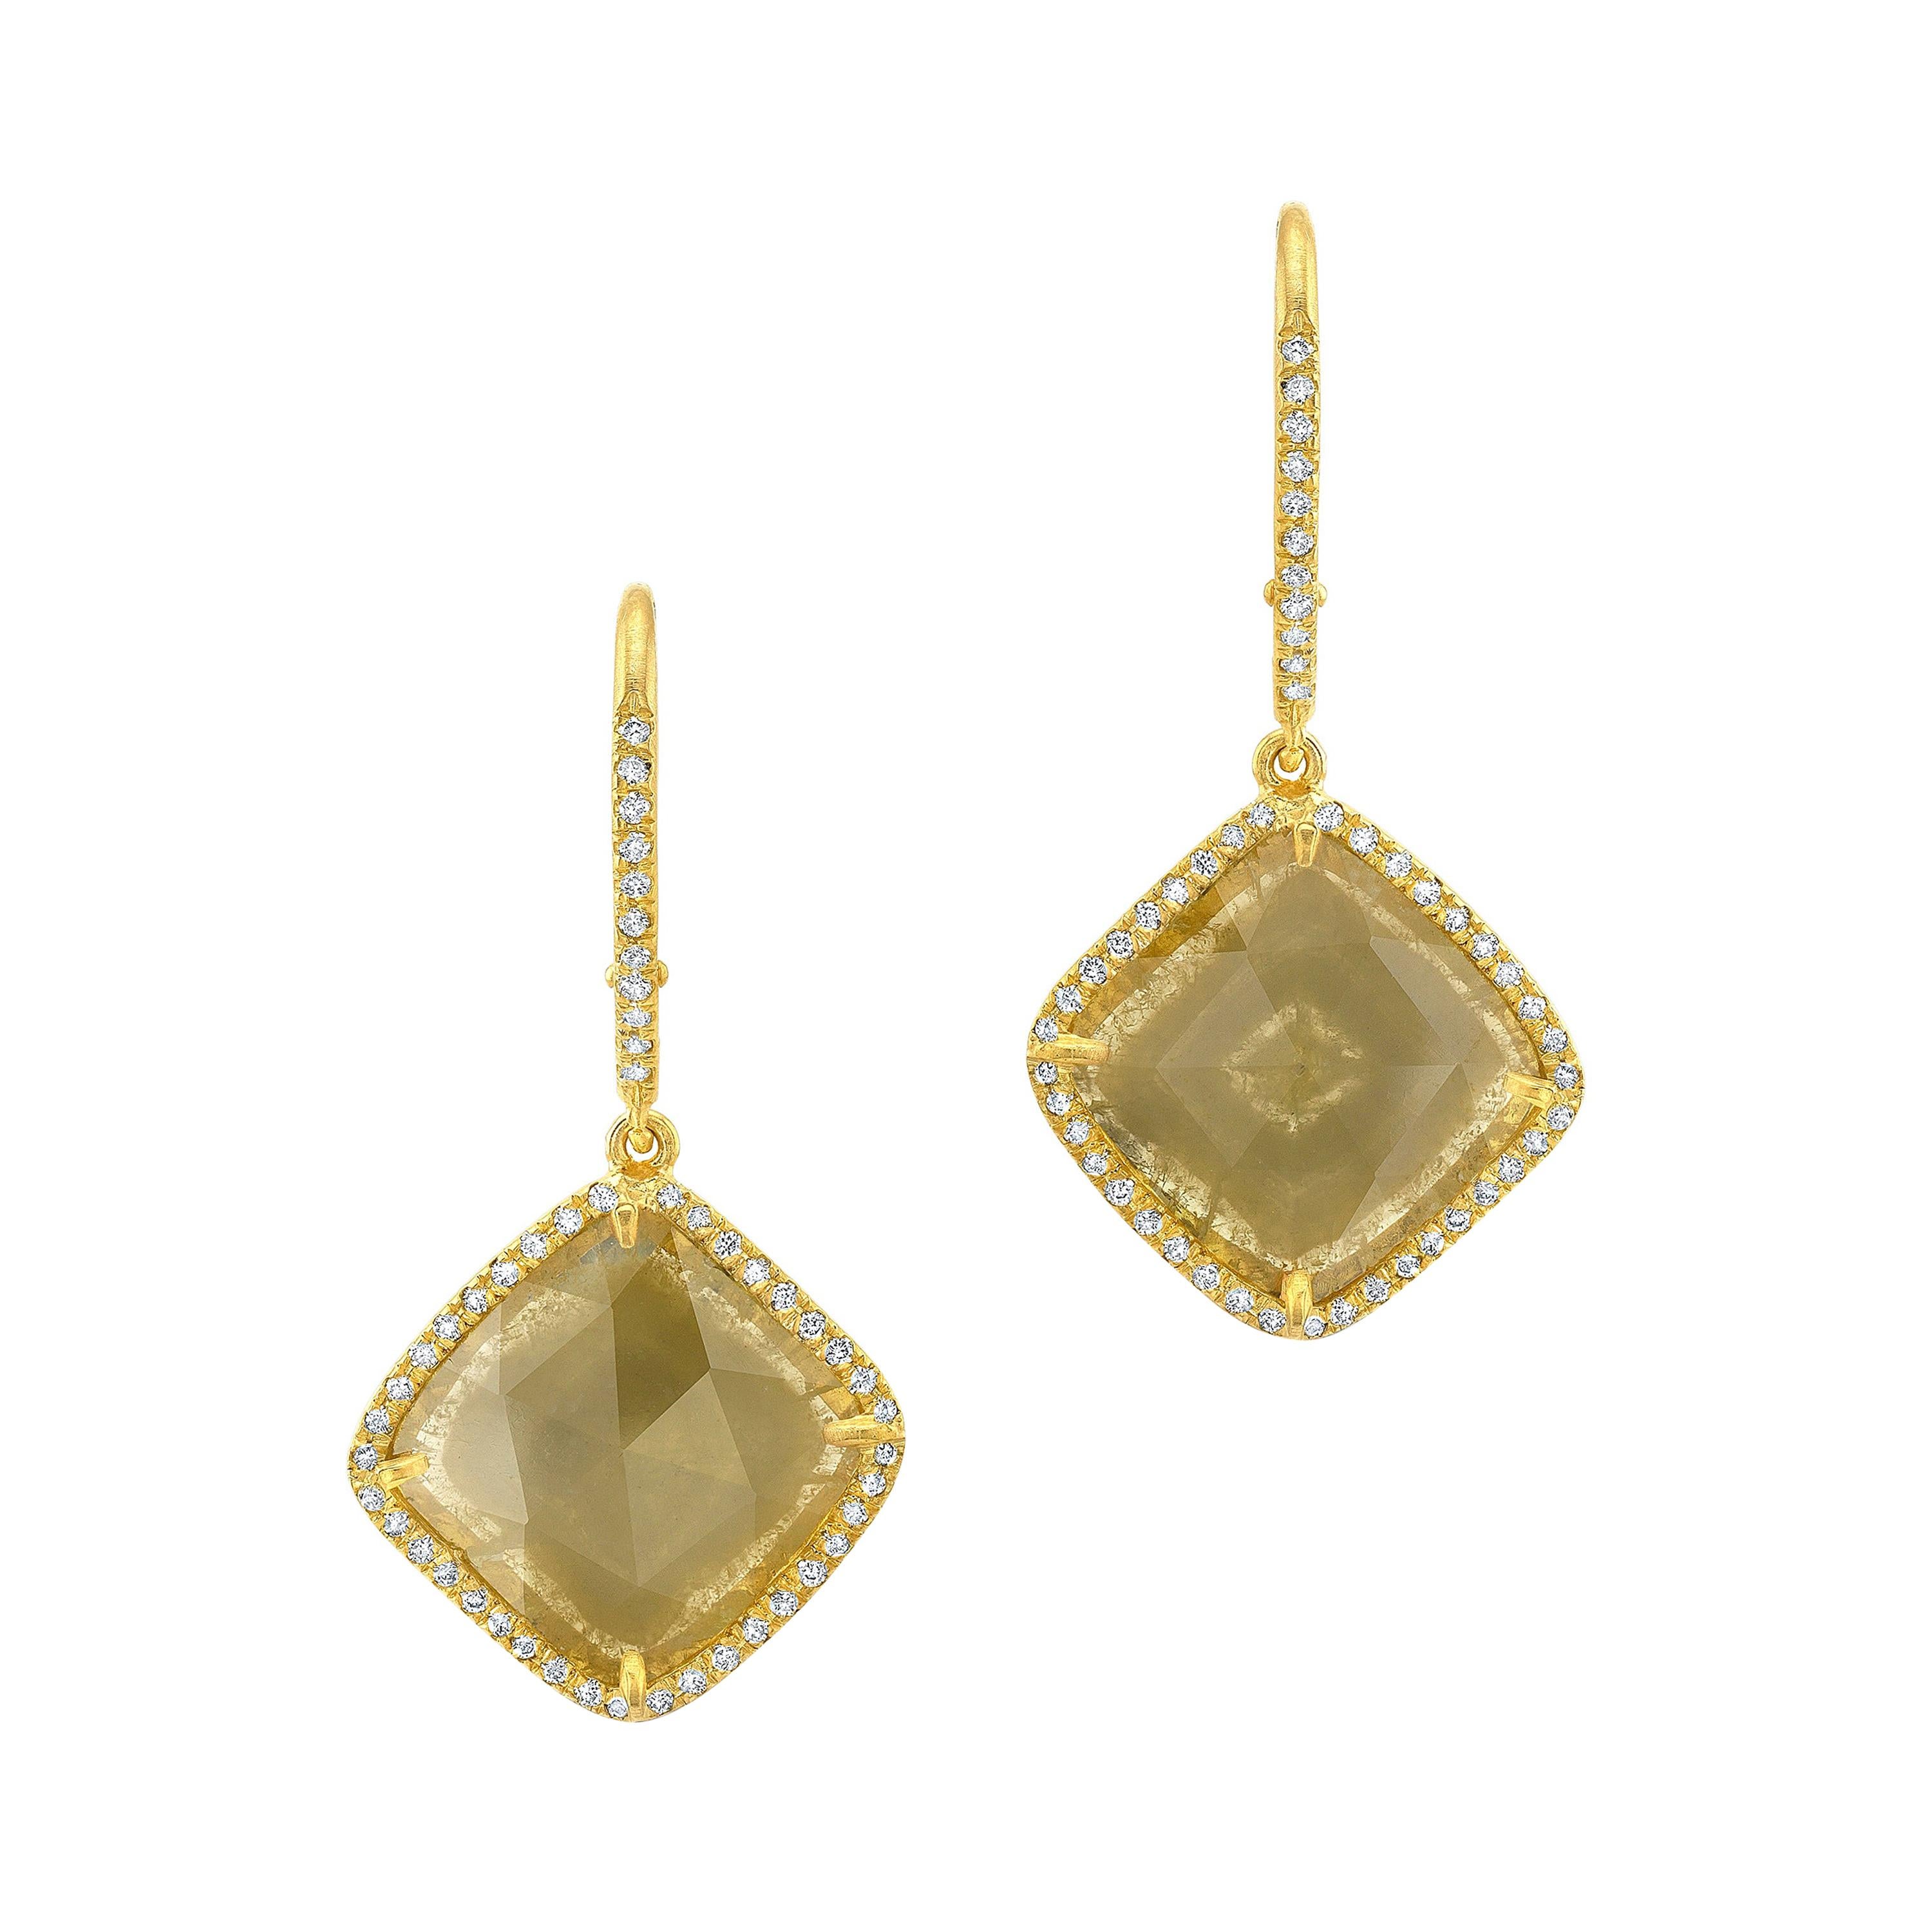 Green Yellow Diamond Slice Earrings with Pave Diamond Halo in 18k Yellow Gold